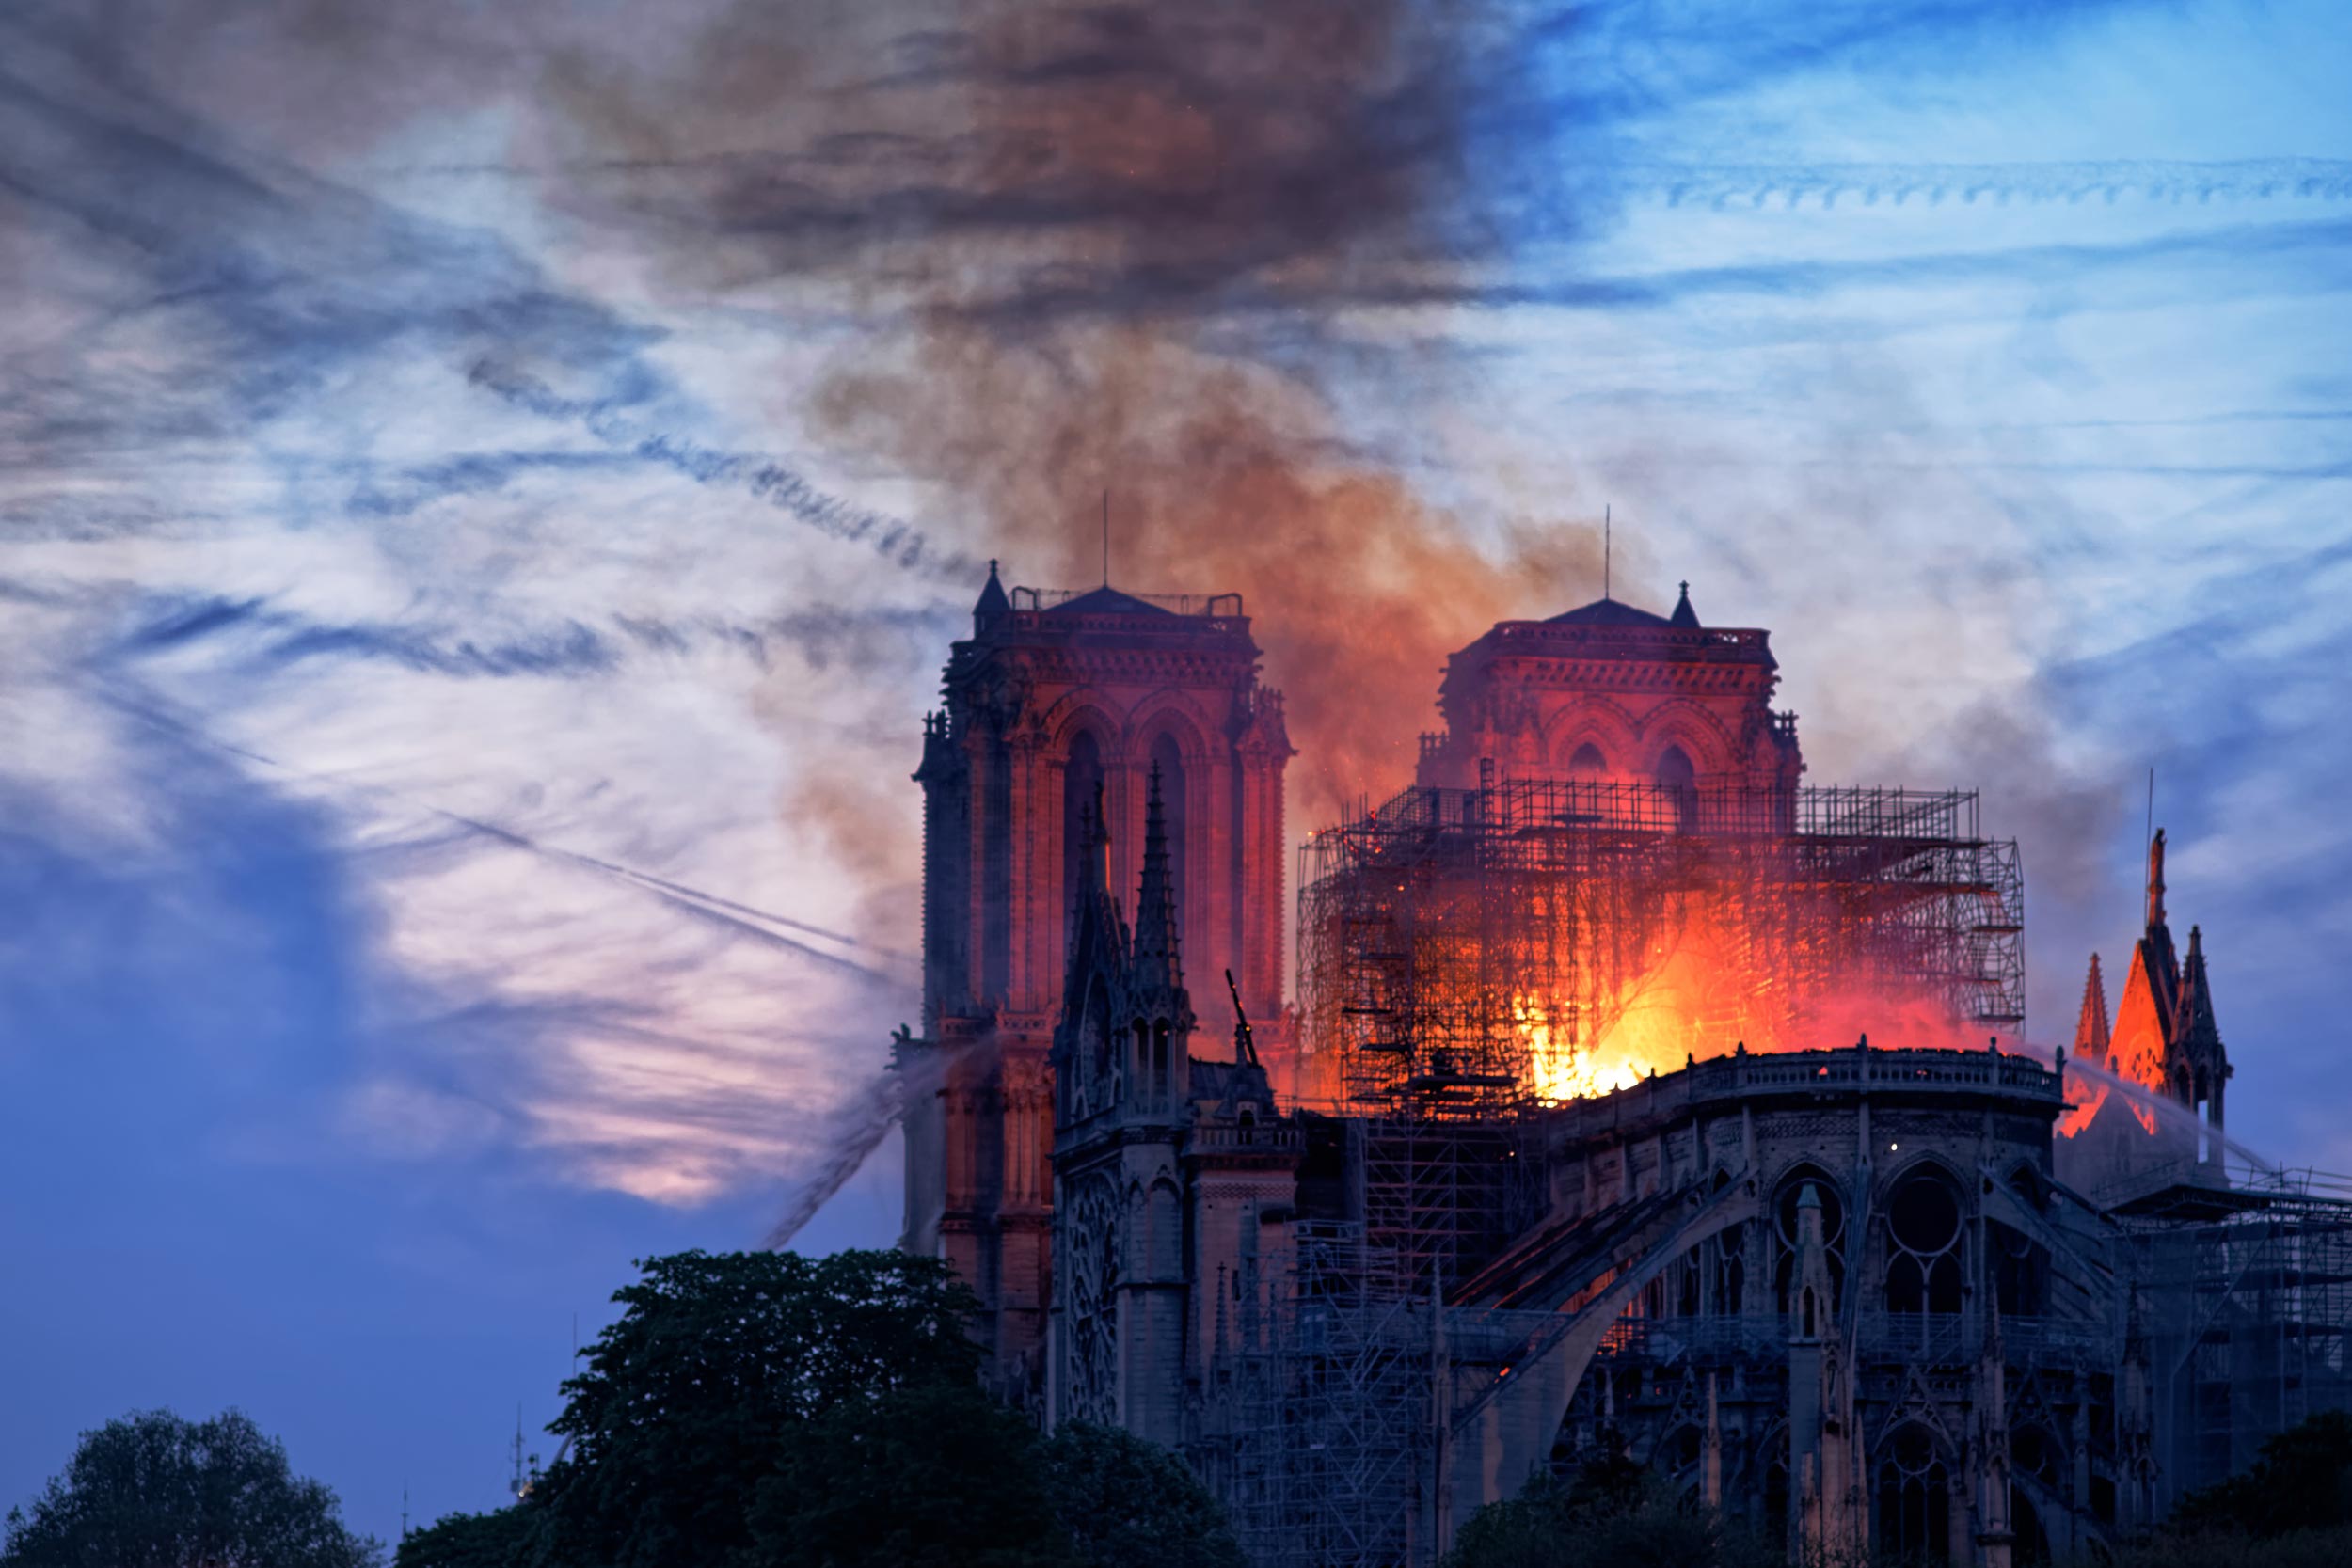 Notre Dame in flames